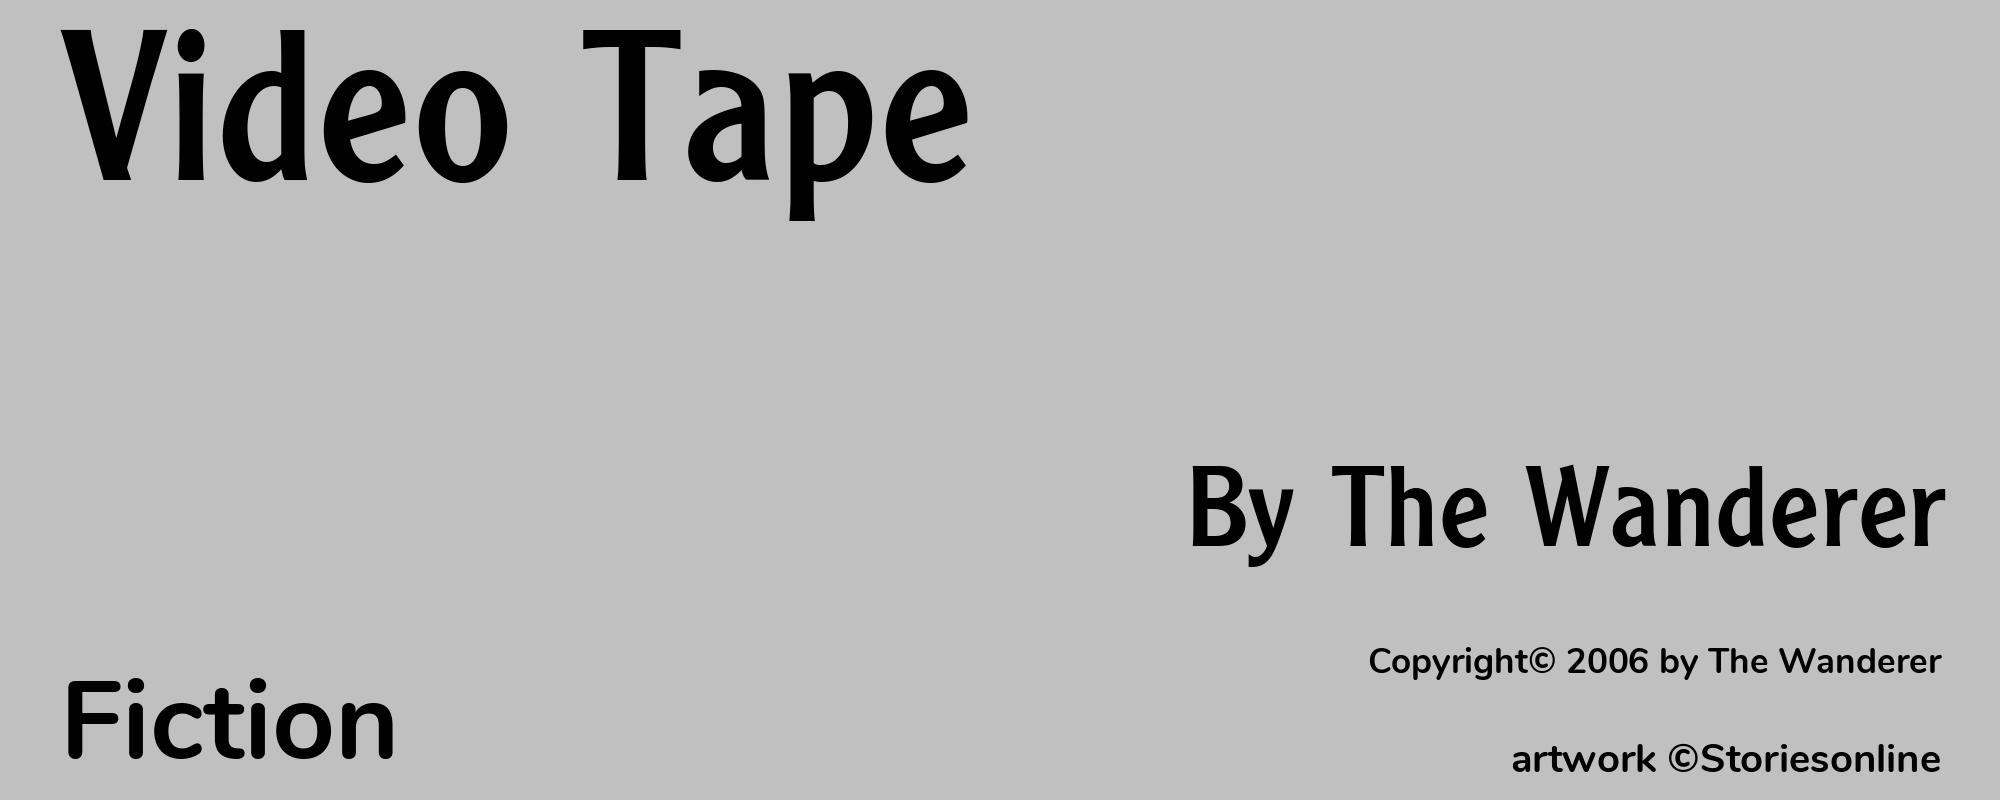 Video Tape - Cover